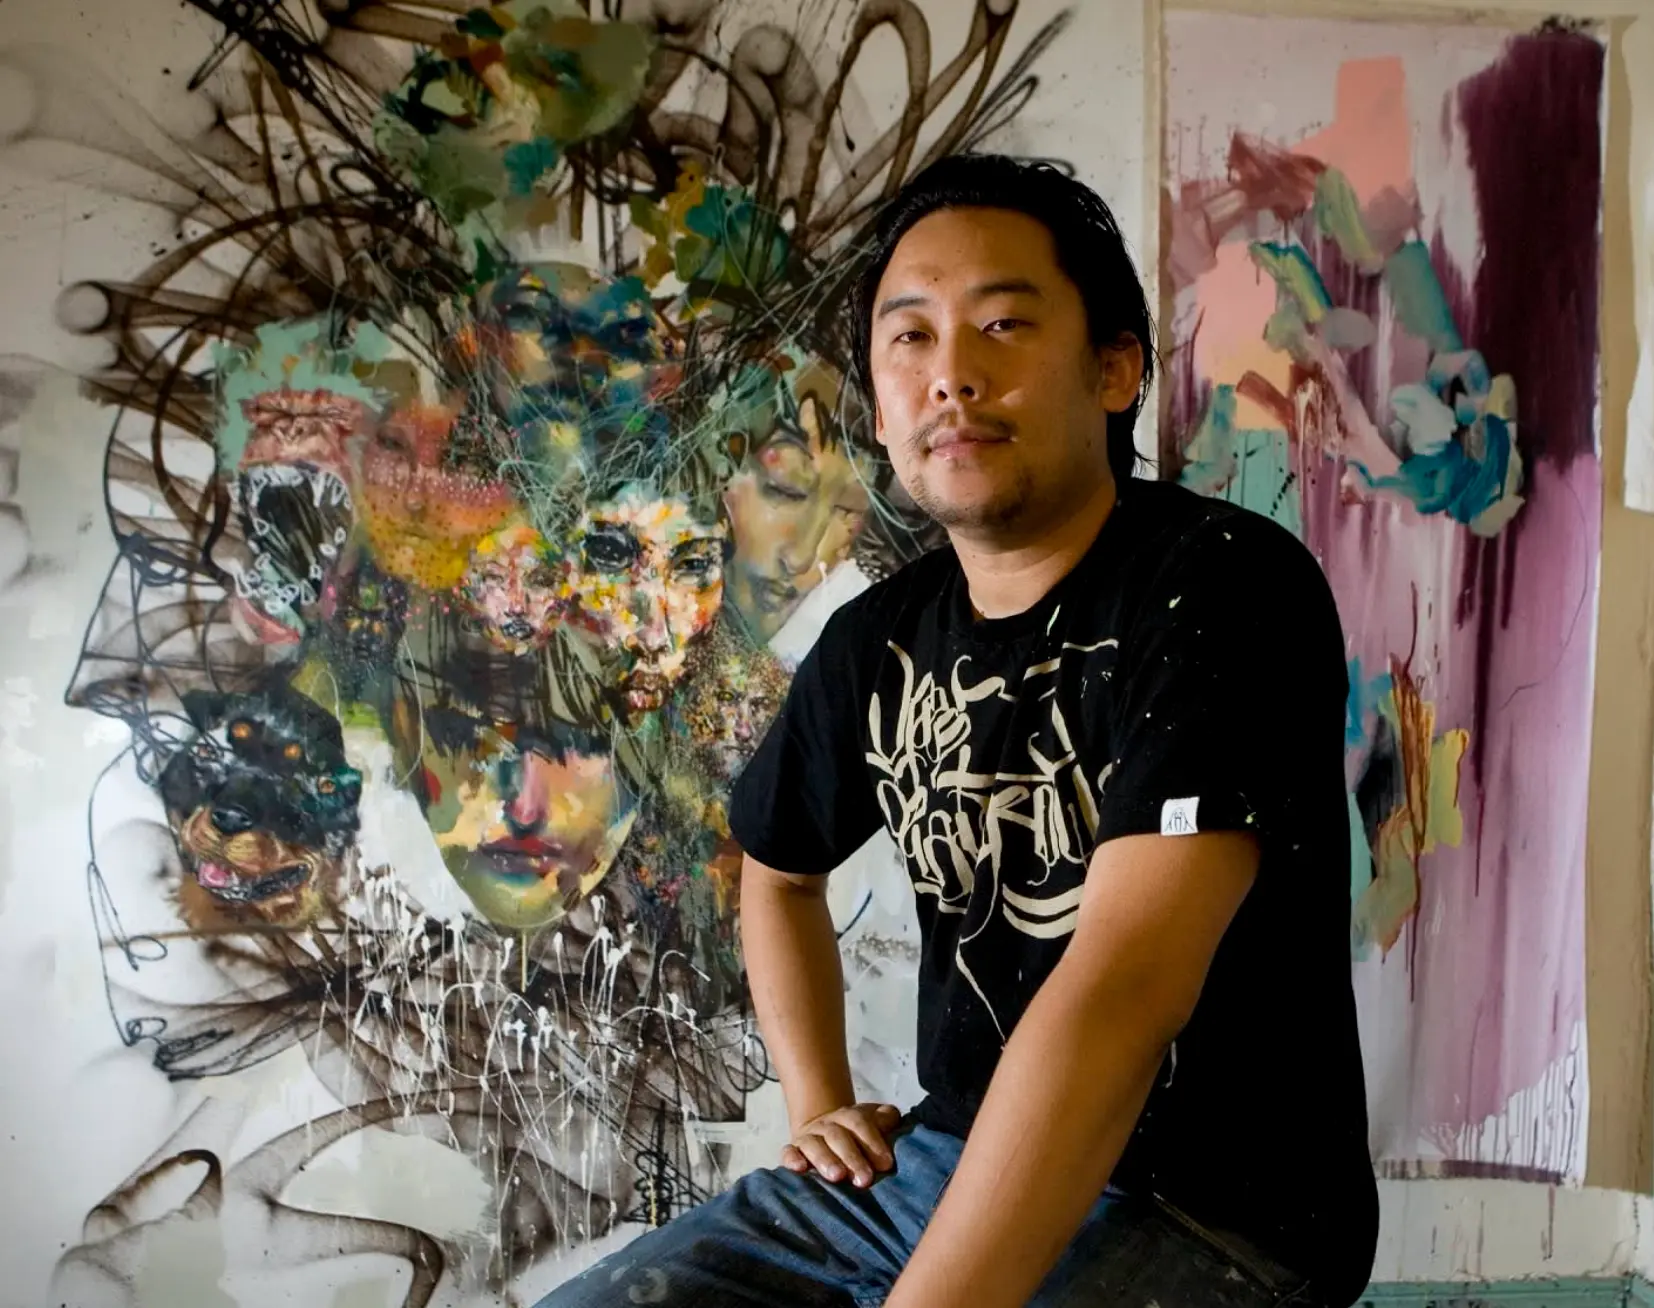 How rich is david choe?